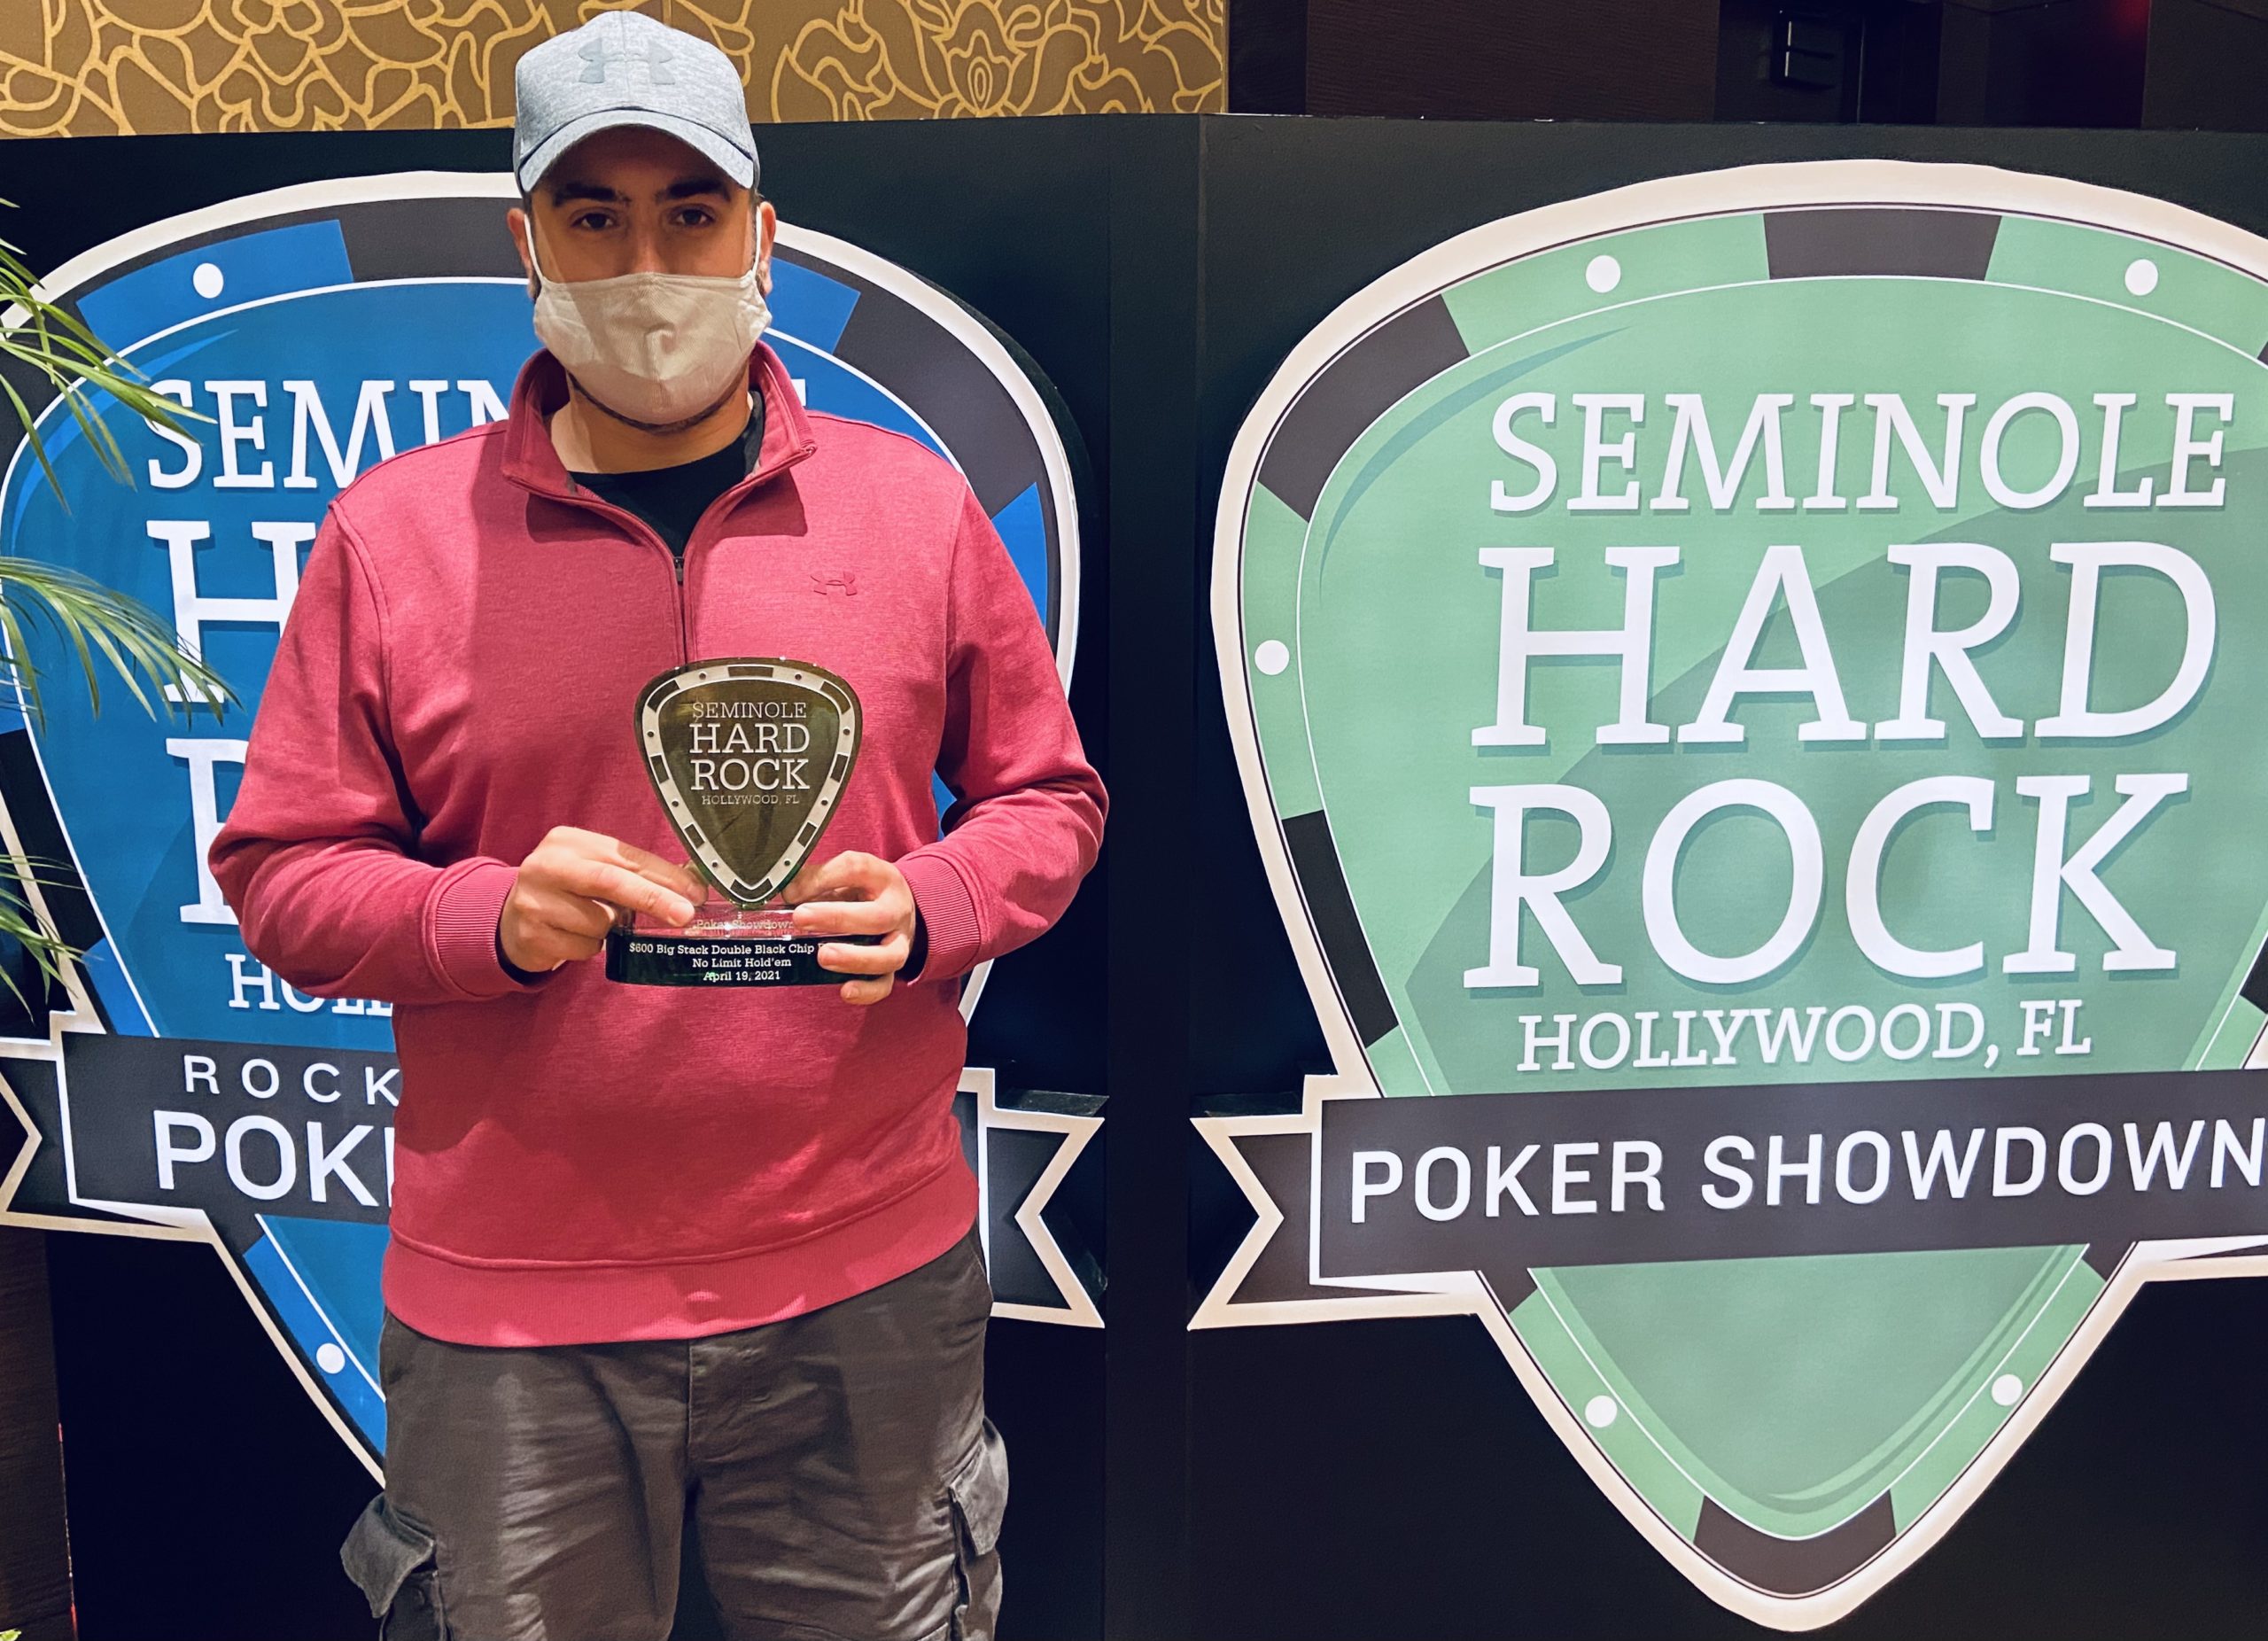 James Anderson Wins Event 8 of the 2021 Seminole Hard Rock Poker Showdown Outright for $35,540 Seminole Hard Rock Hollywood Poker